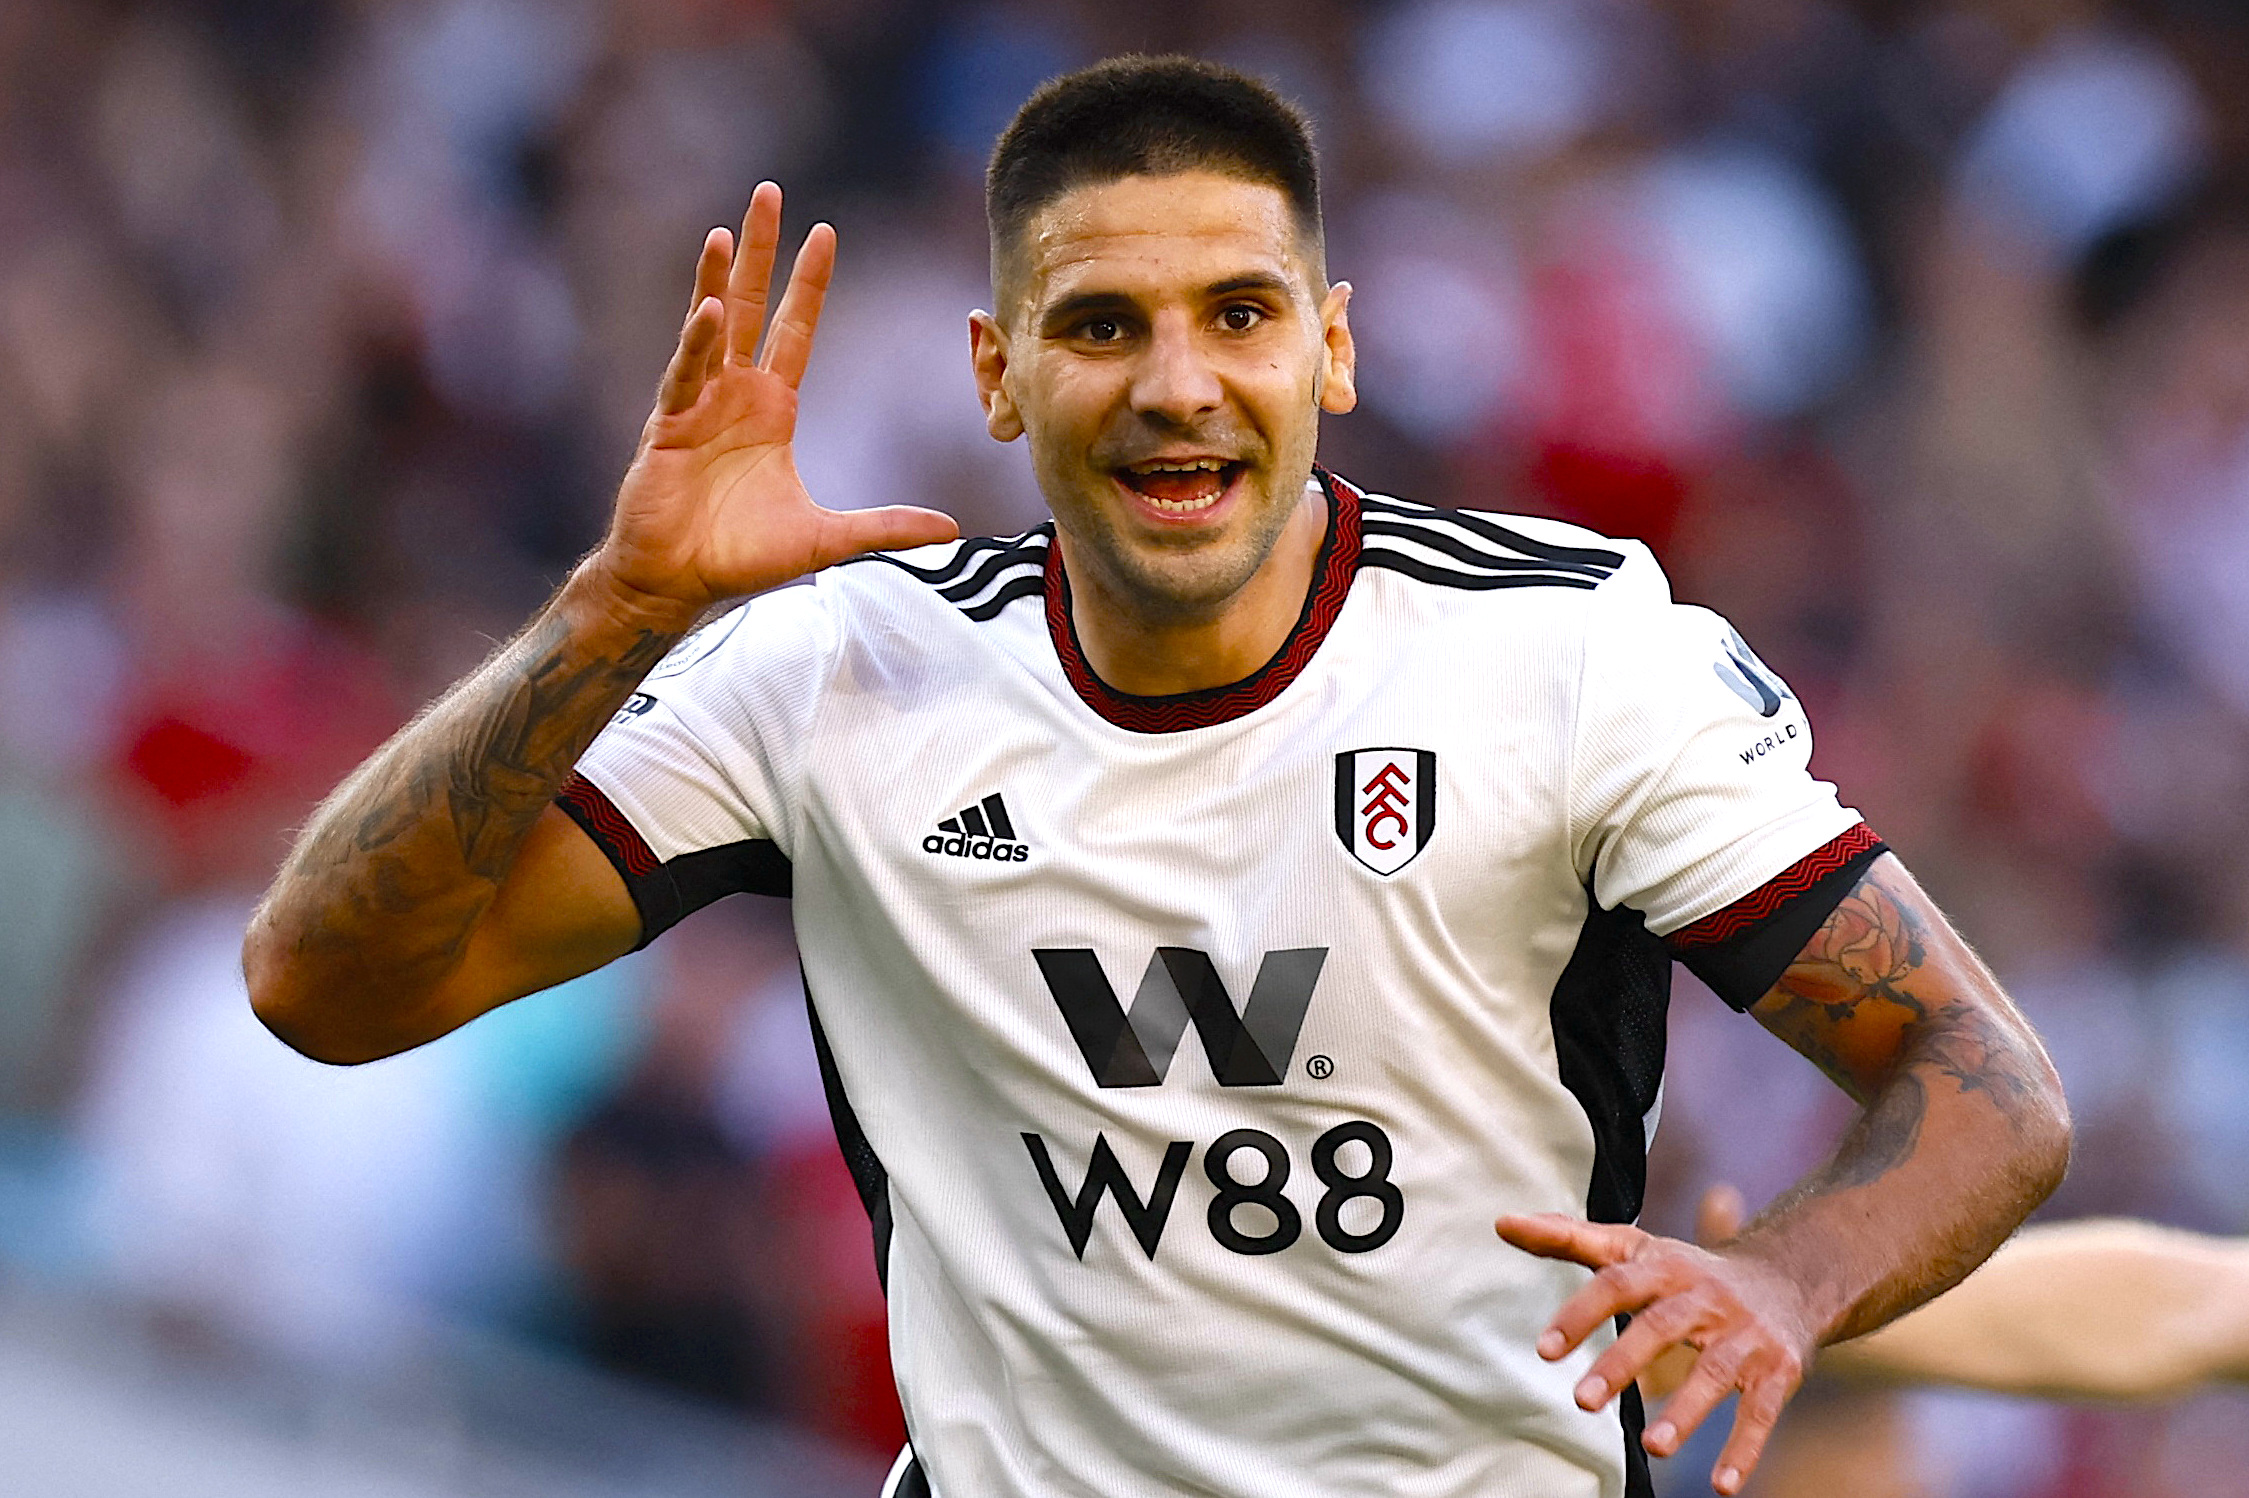 Aleksandar Mitrović Age, Salary, Net worth, Current Teams, Career, Height, and much more